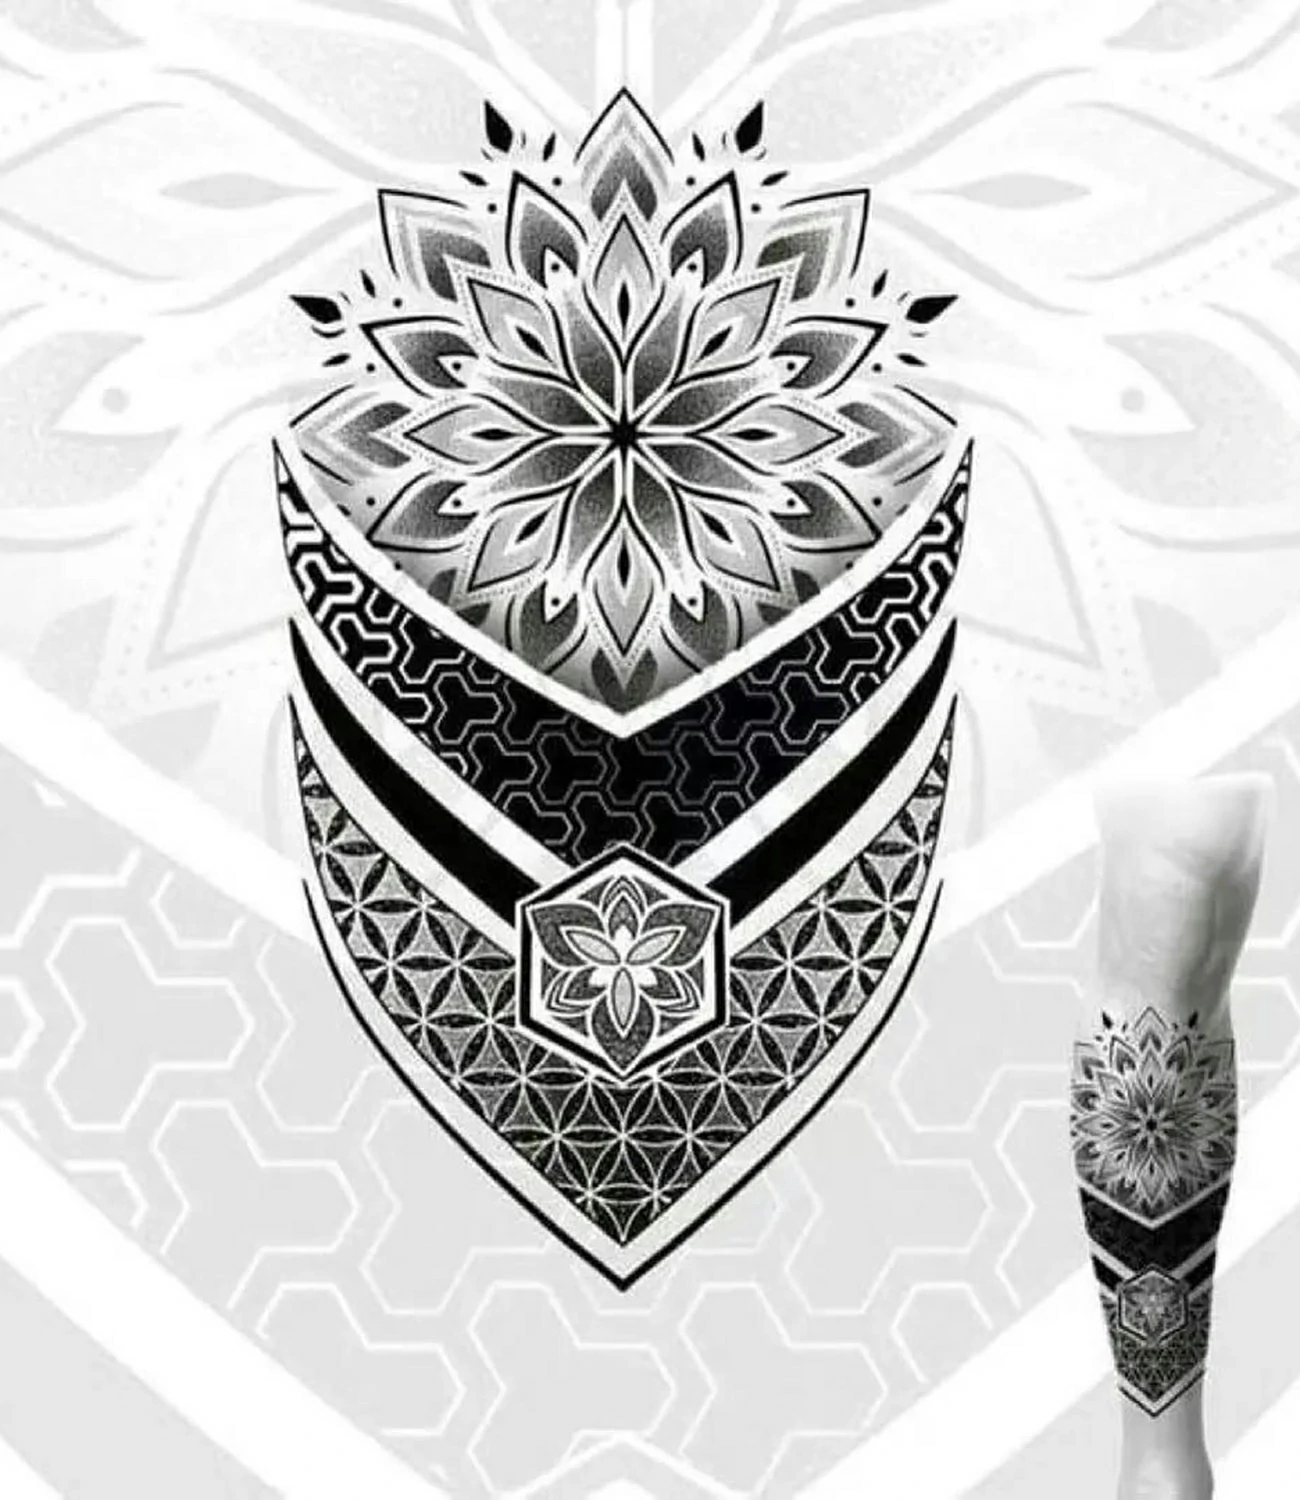 Pattern Geometric Tattoo Stencil: Pattern geometric tattoo stencils provide precise outlines for creating symmetrical and intricate geometric designs.